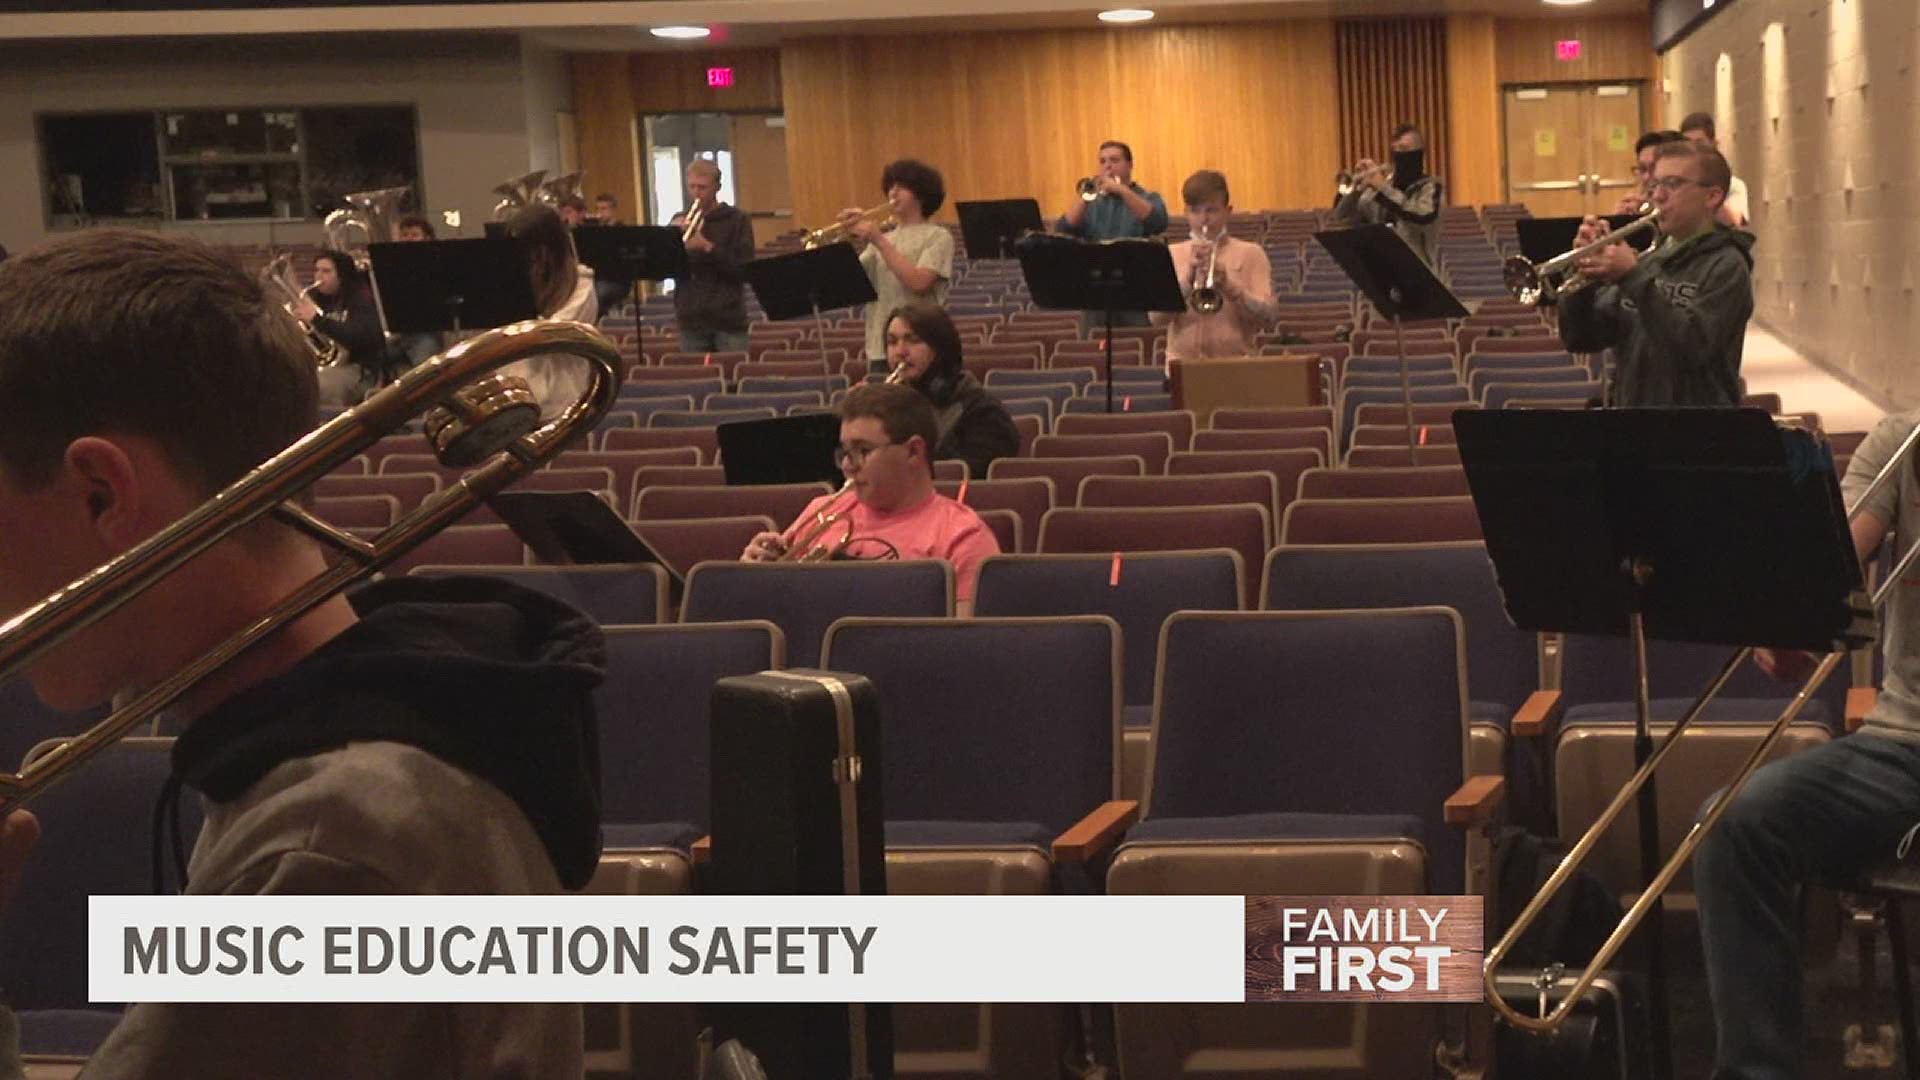 As more schools return to in-person learning, music education advocates are stressing the importance of band and choral activities in a safe manner.